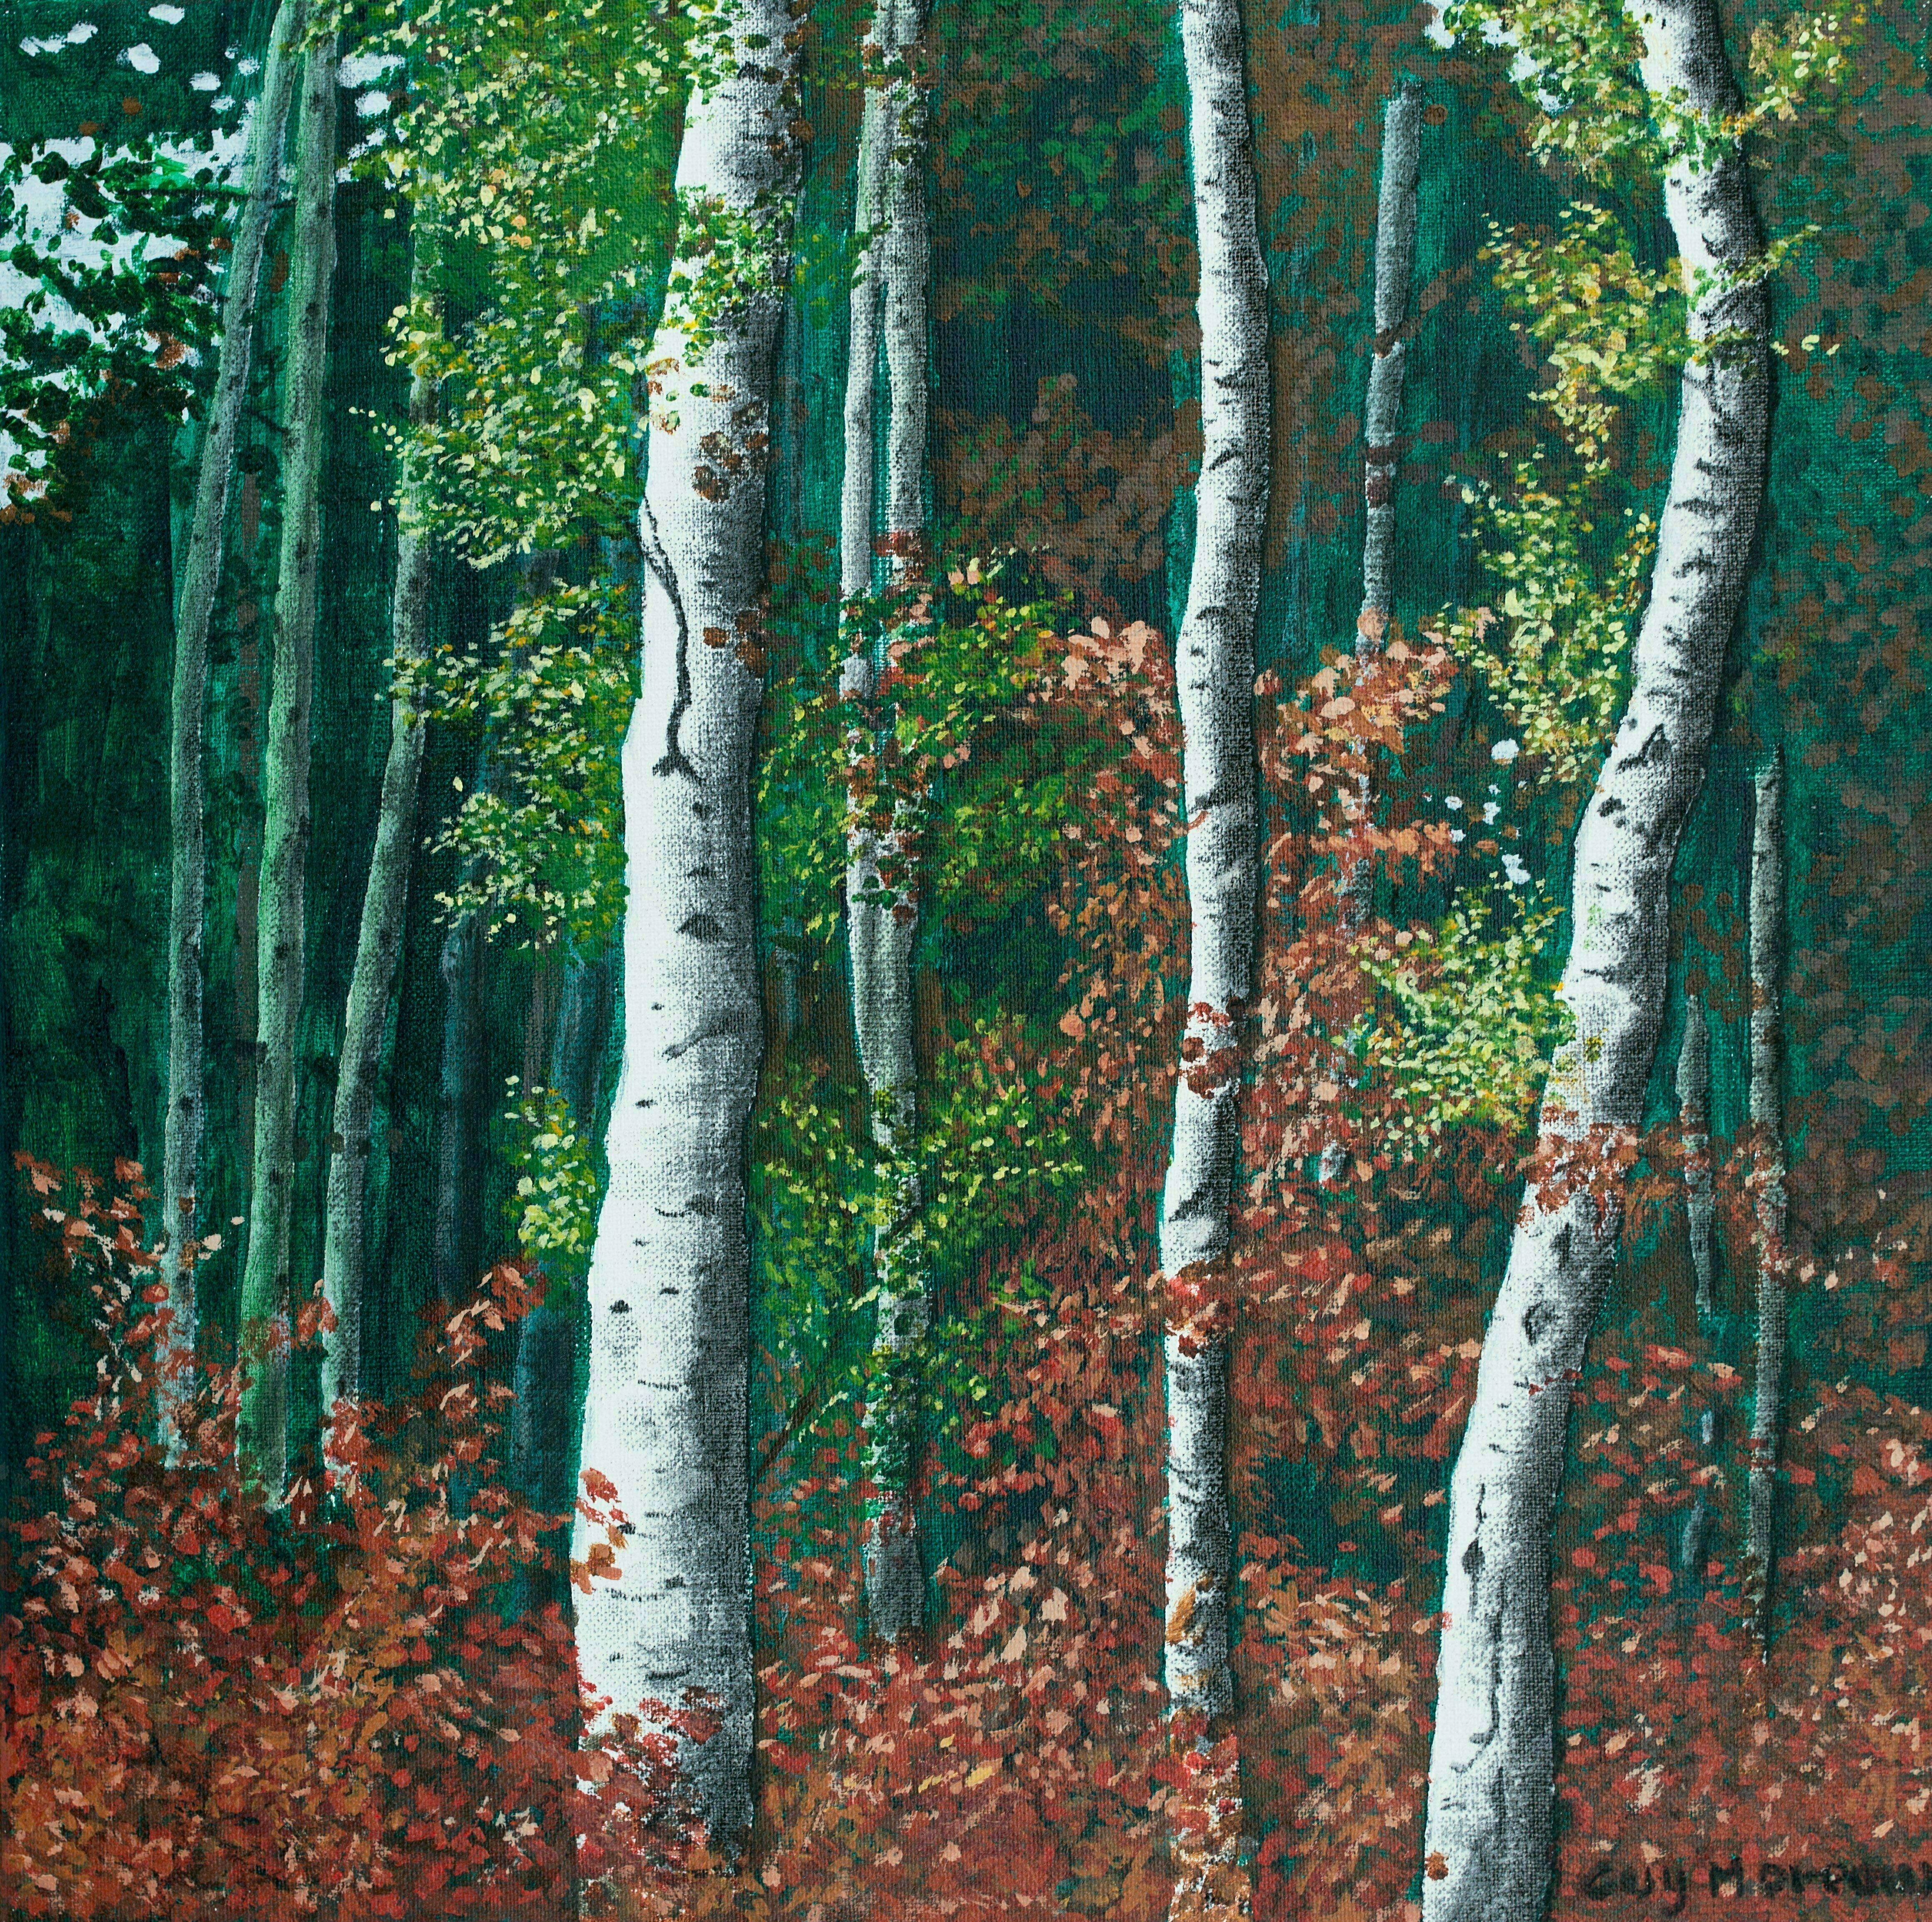 Guy Octaaf Moreaux: 'early autumn in limburg', 2017 Acrylic Painting, nature. Acrylic and carbon on linen.Nature keeps inspiring me.  Limburg province has a sand- rich soil which gives a variety of trees, pines are mixed in with others. ...